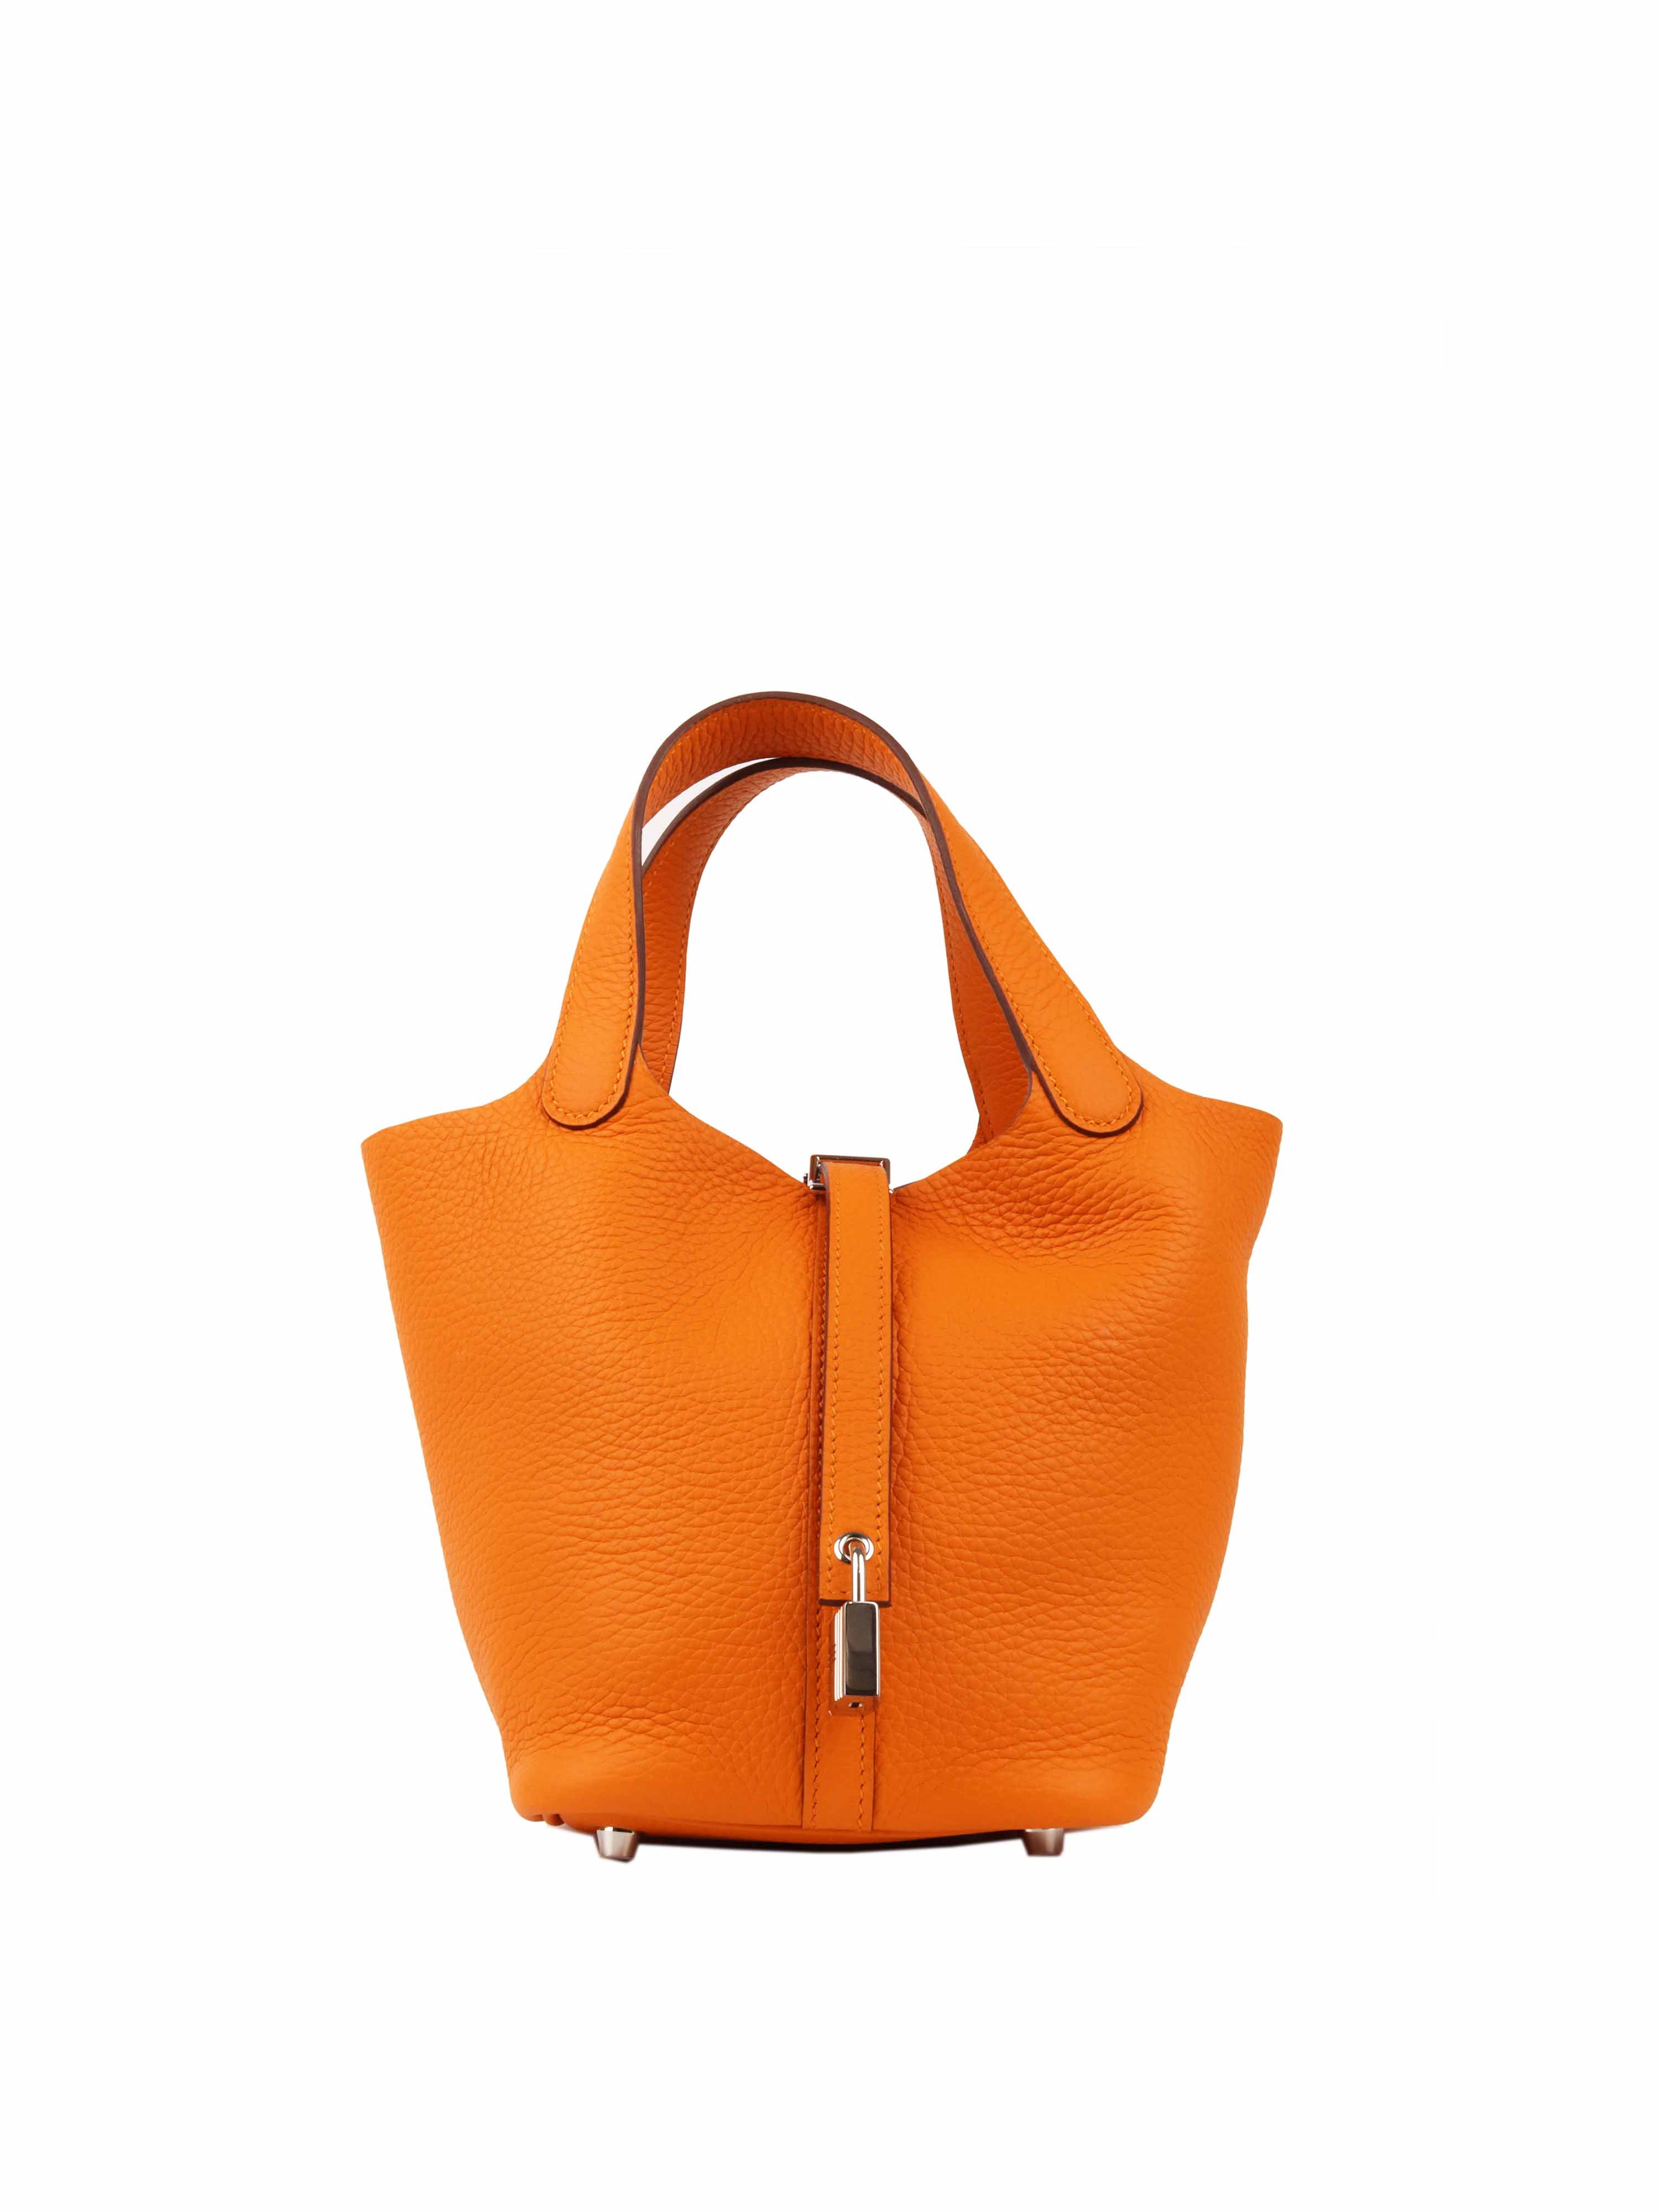 We love Hermes - Picotin 22 /18 ETAIN/PHW/TC/STAMP C SIZE 22/ SIZE 18 /  SOLD